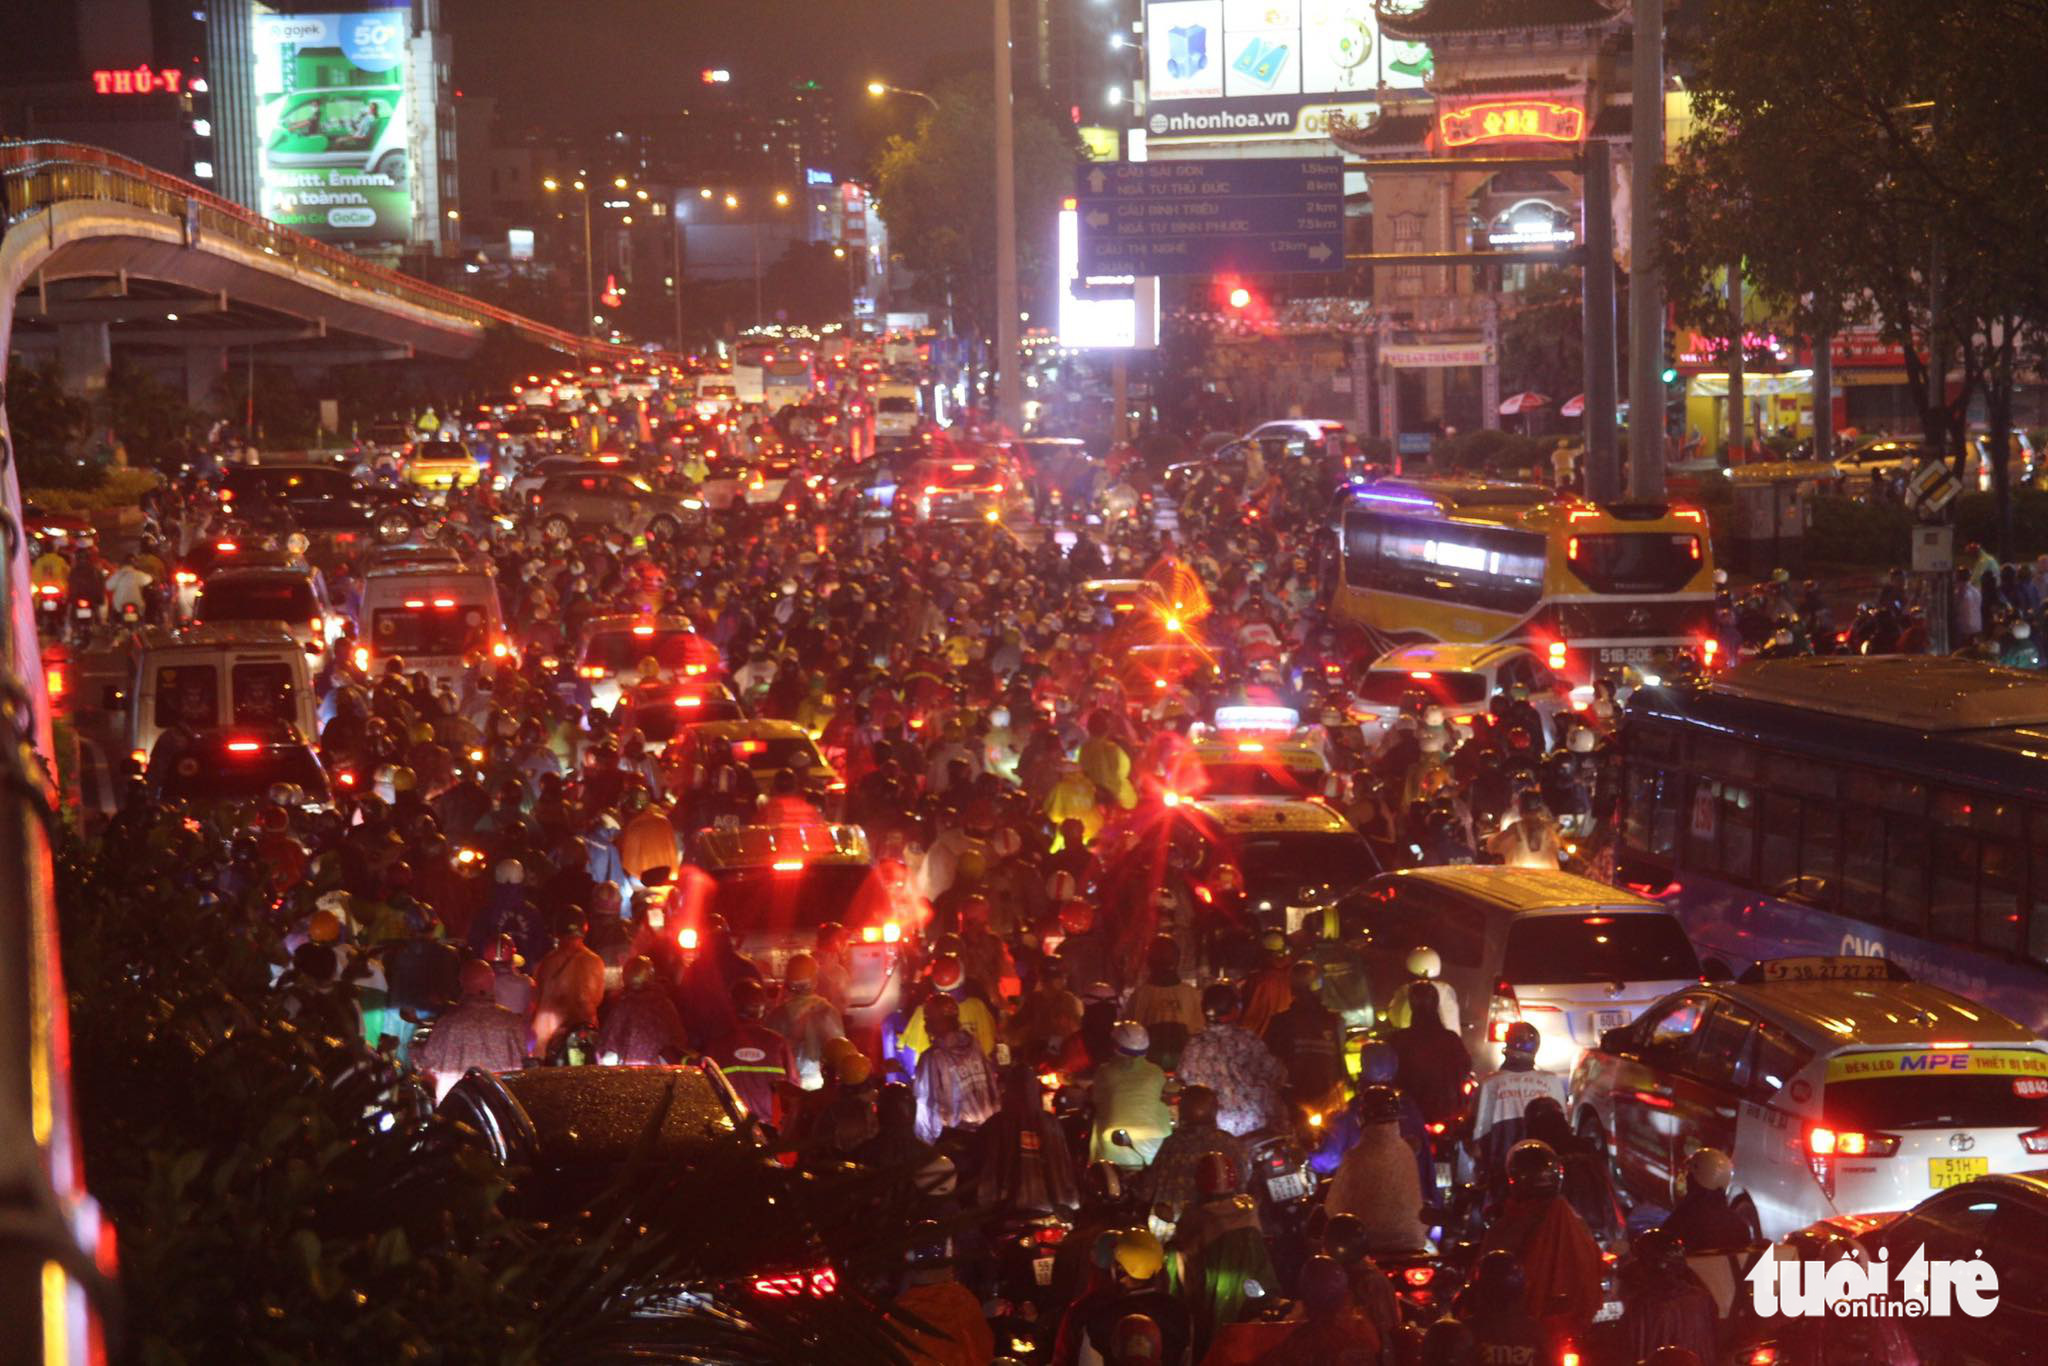 Thousands of vehicles are stuck in traffic at the Hang Xanh Intersection in Binh Thanh District, Ho Chi Minh City, August 15, 2022. Photo: Phuong Quyen / Tuoi Tre